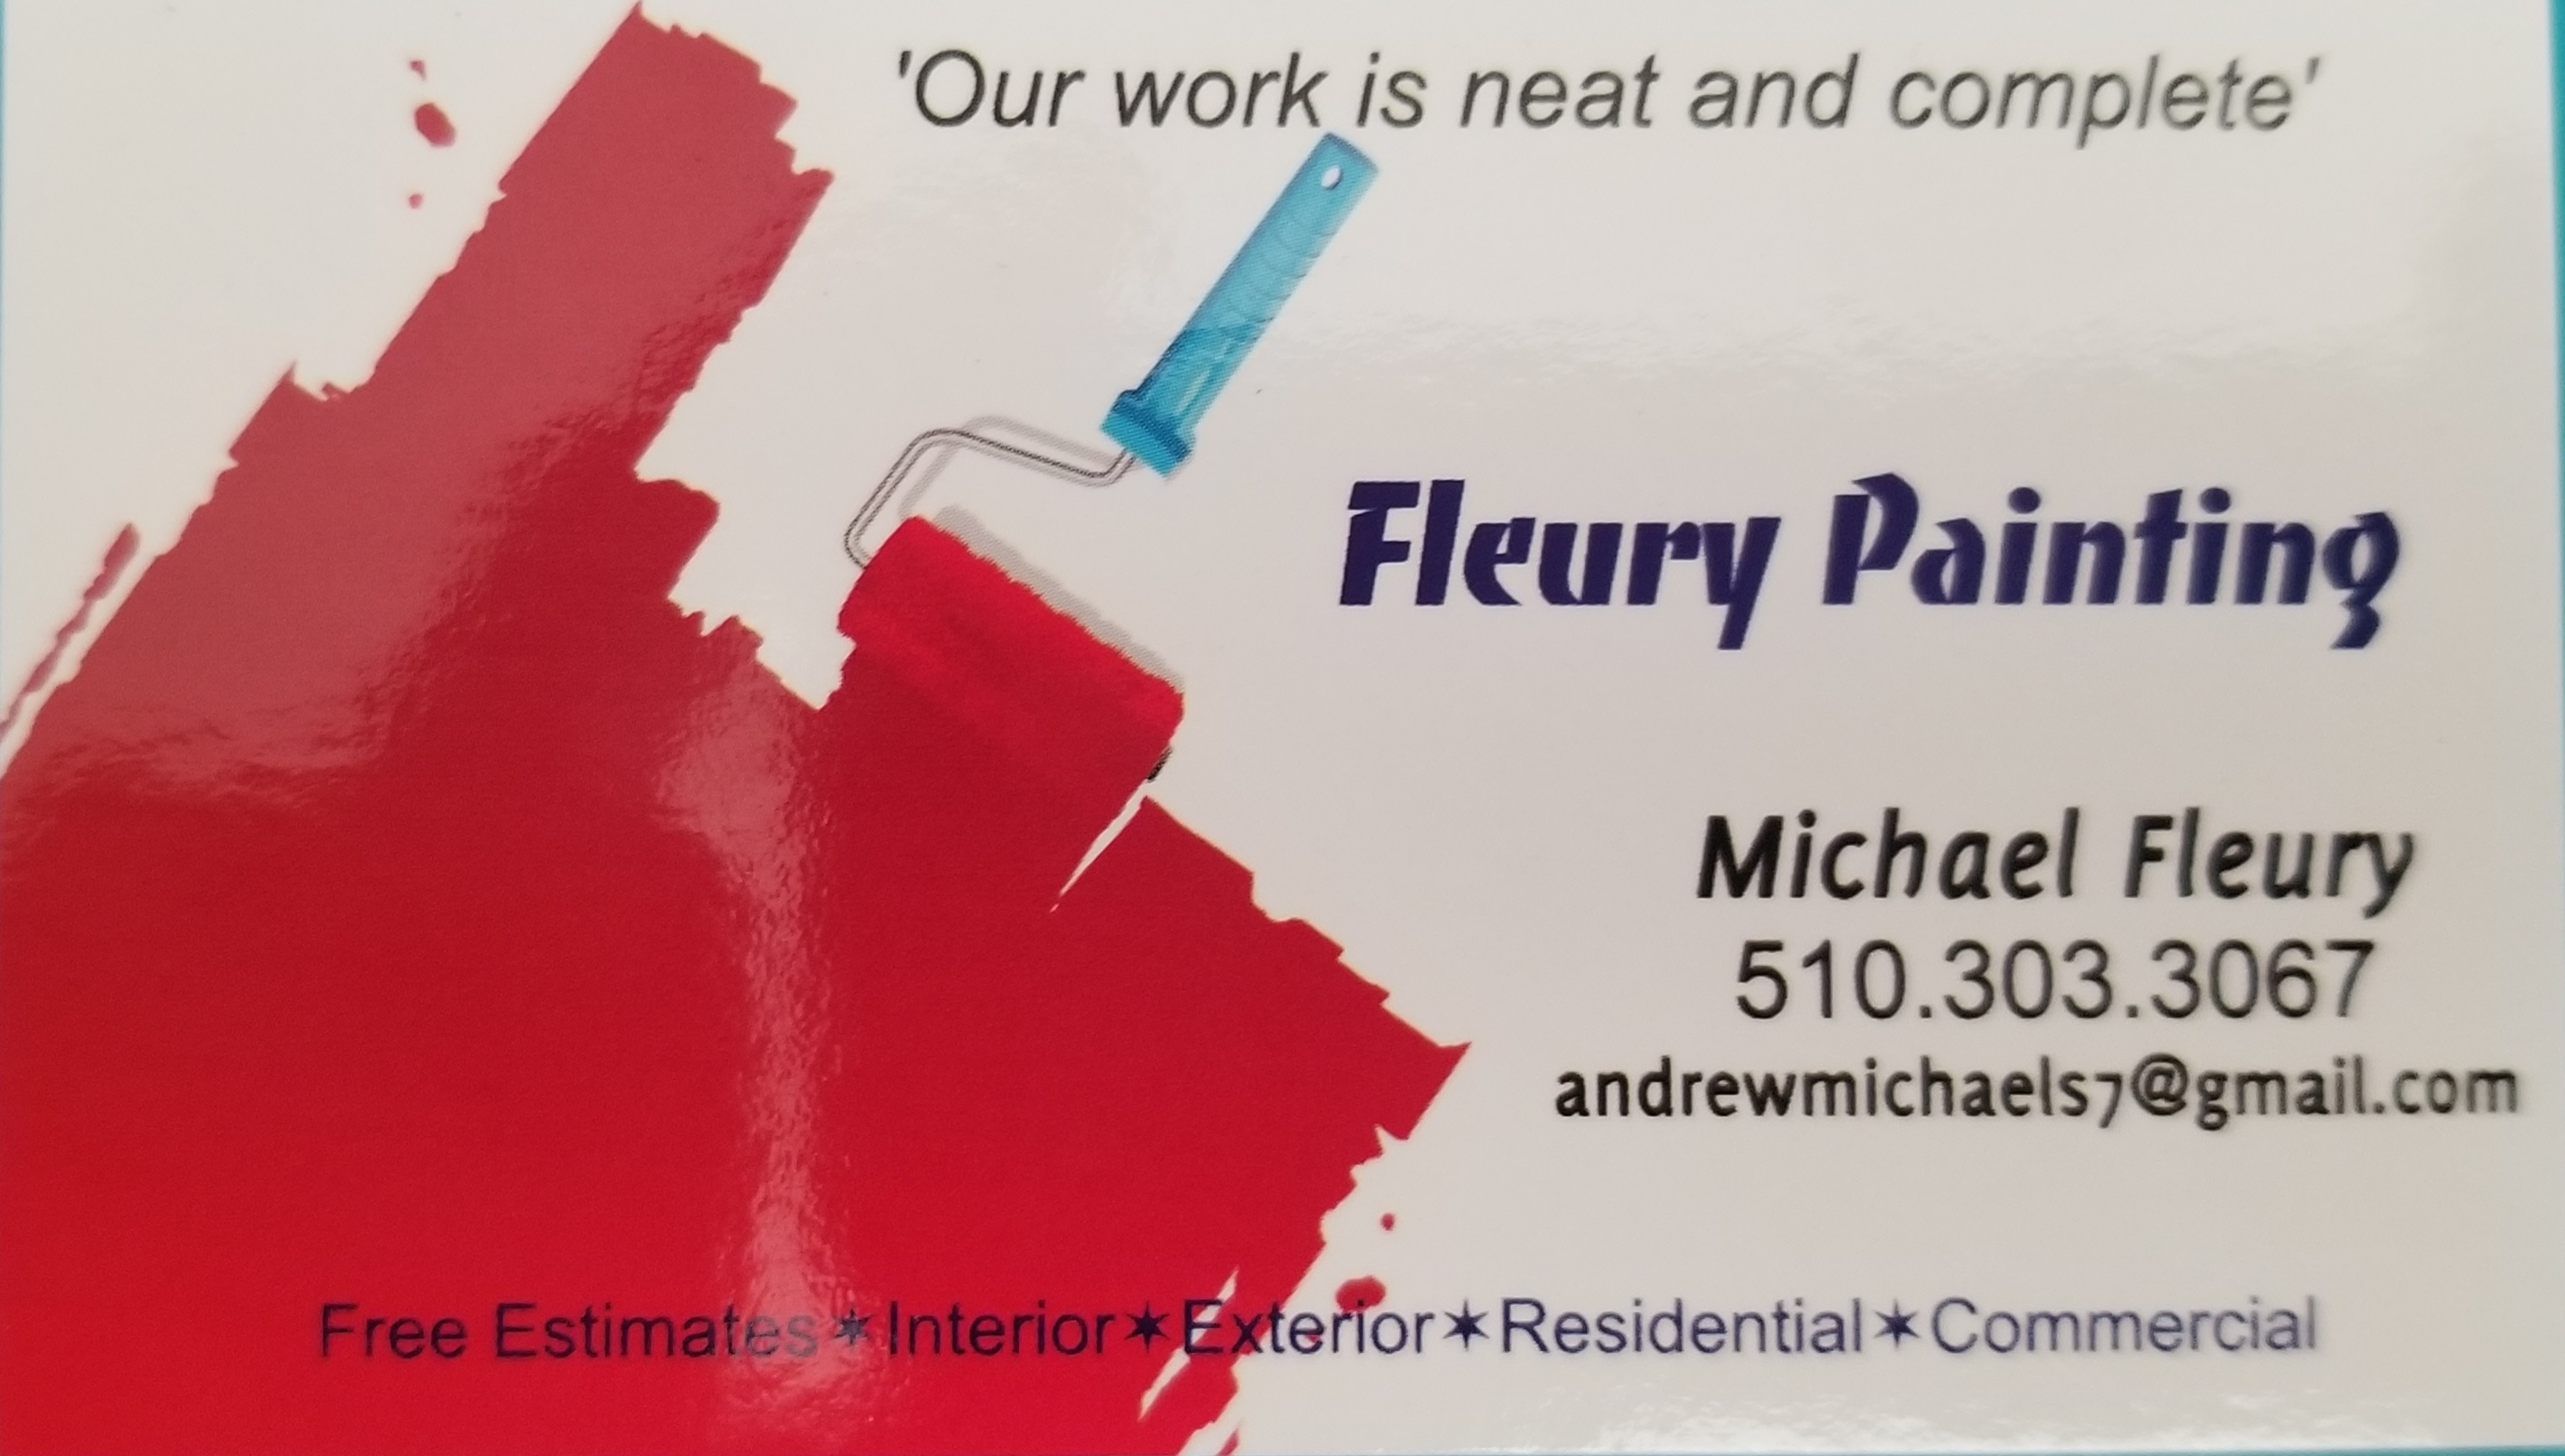 Fleury Painting - Unlicensed Contractor Logo